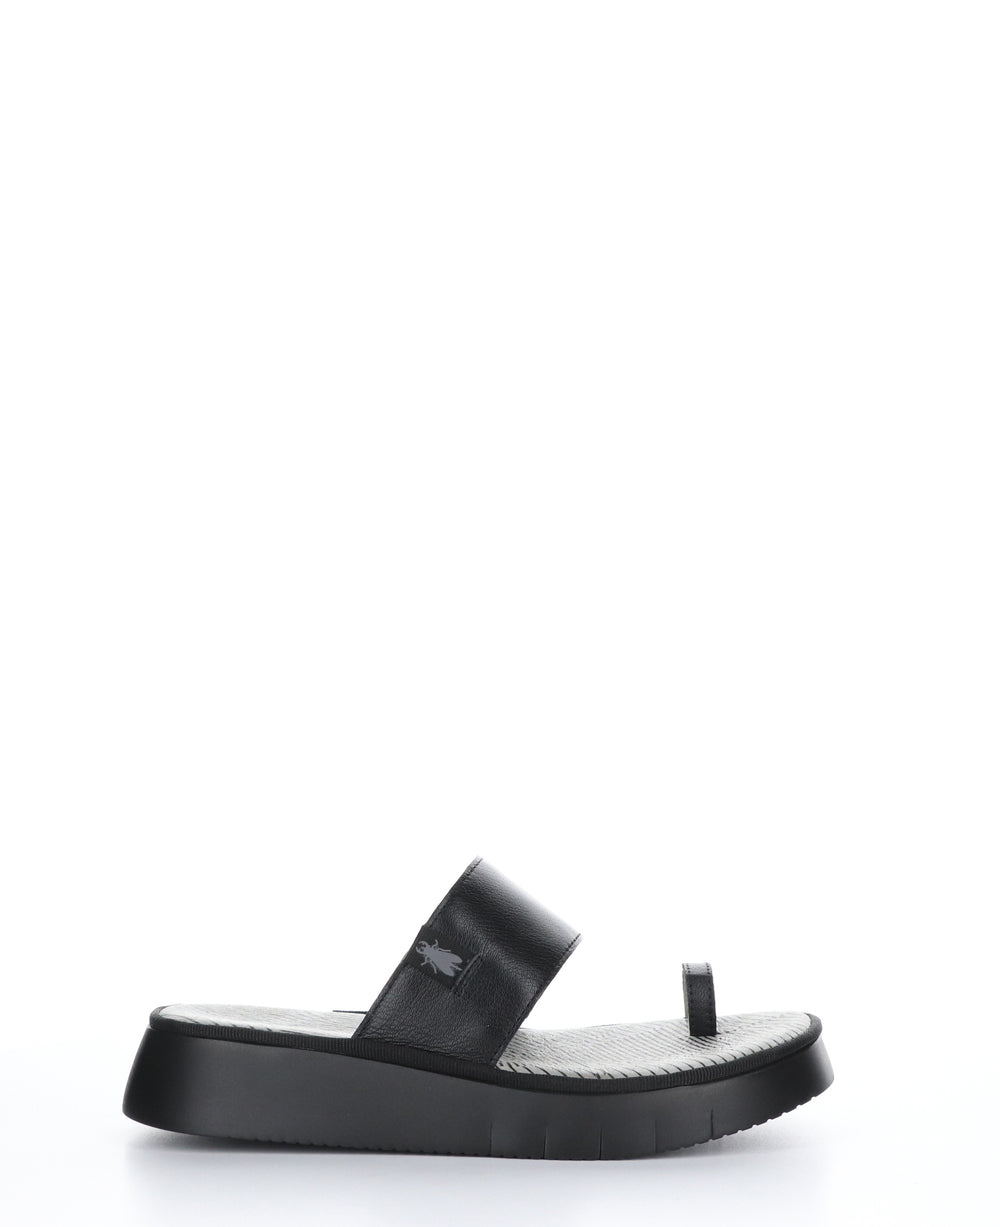 CHEV316FLY Mousse Black Strappy Sandals